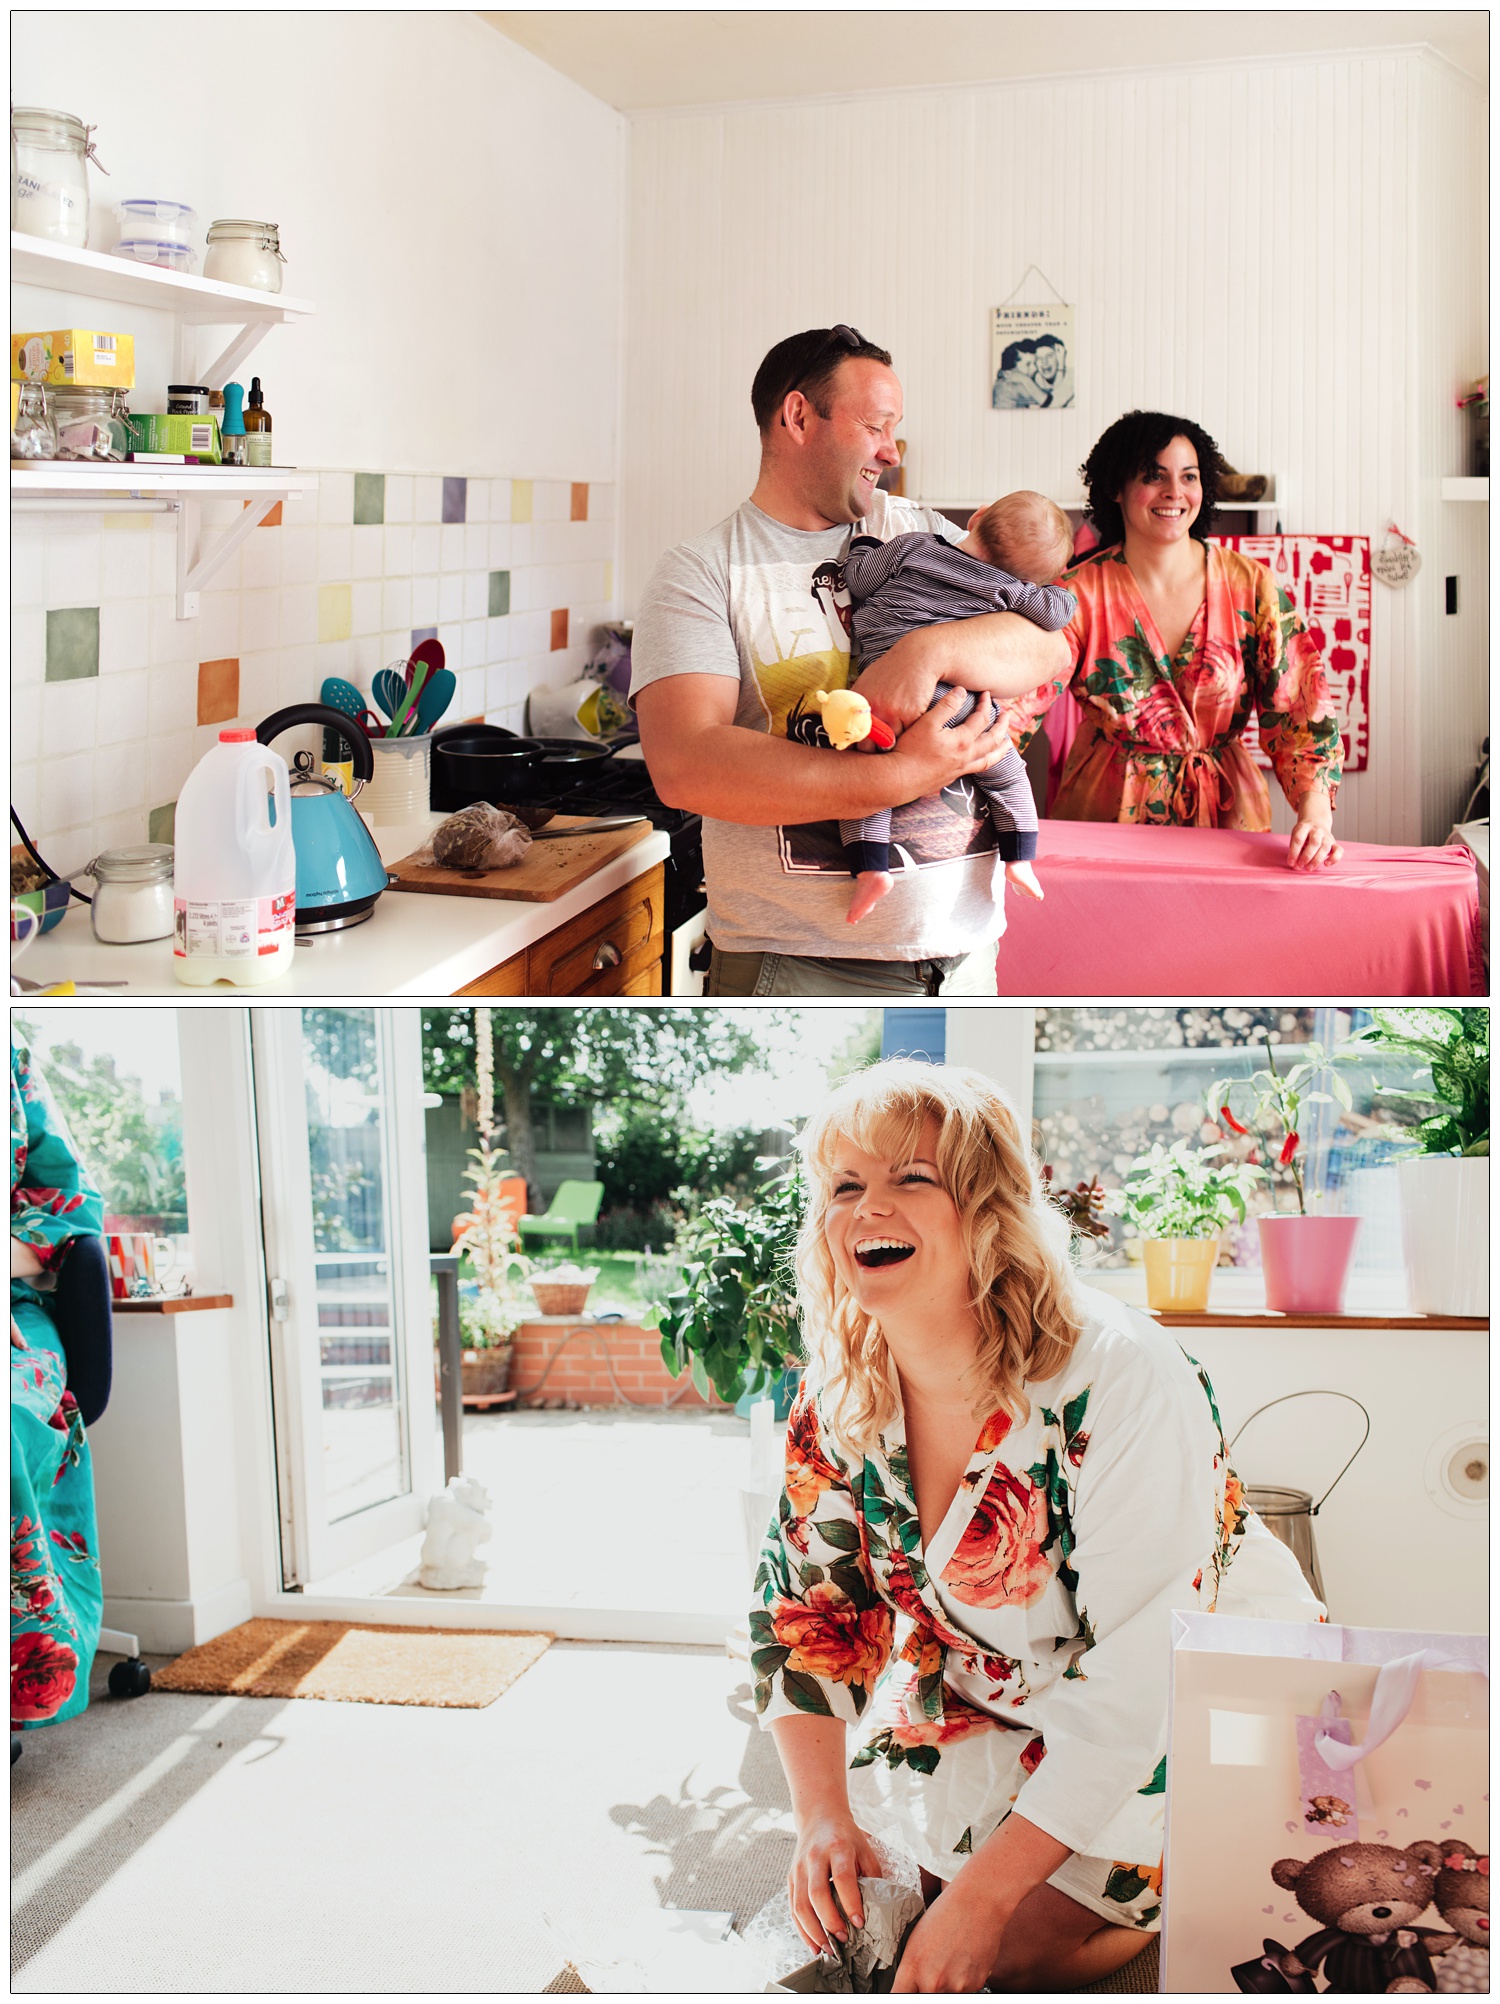 A man holds a baby in a kitchen. A woman in a dressing gown is ironing. The bride is laughing.